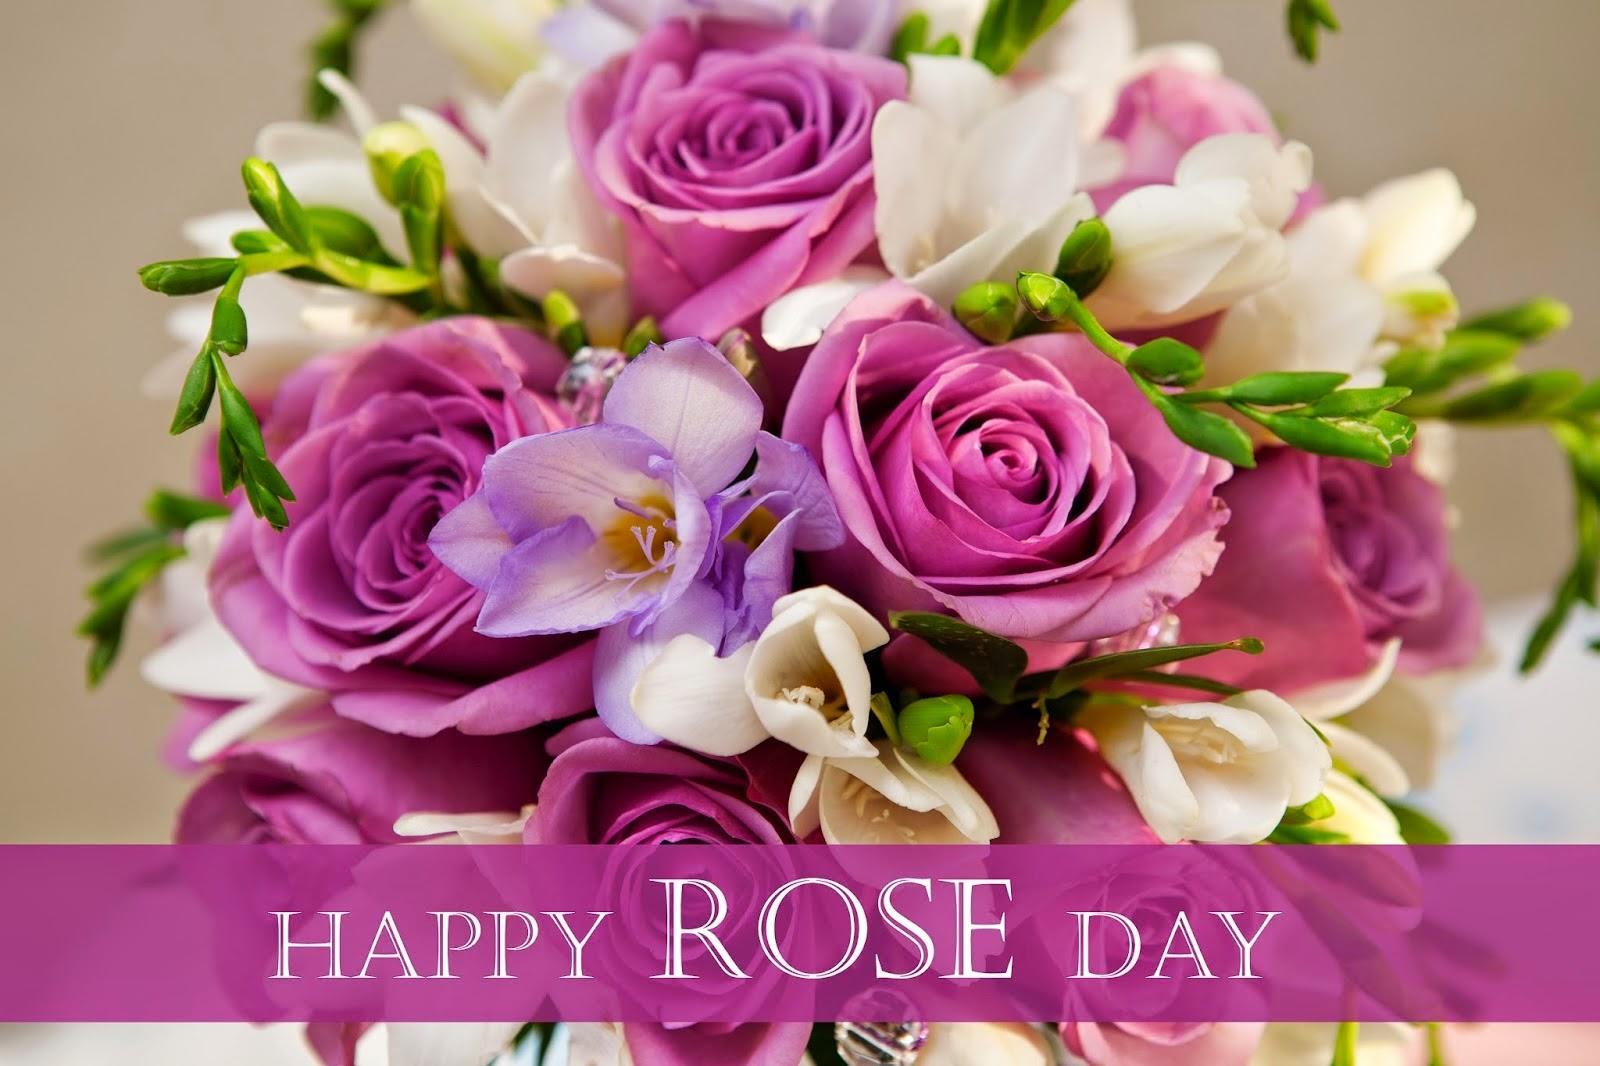 All-New-Happy-Rose-Day-Love-Quotes-Romantic-Cute-Red-Rose-Picturesimage-for-Girlfriend-Rose-day-Latest-HD-Wallpapers-photos-Sweet-pic-for-her-Girlfriend-30